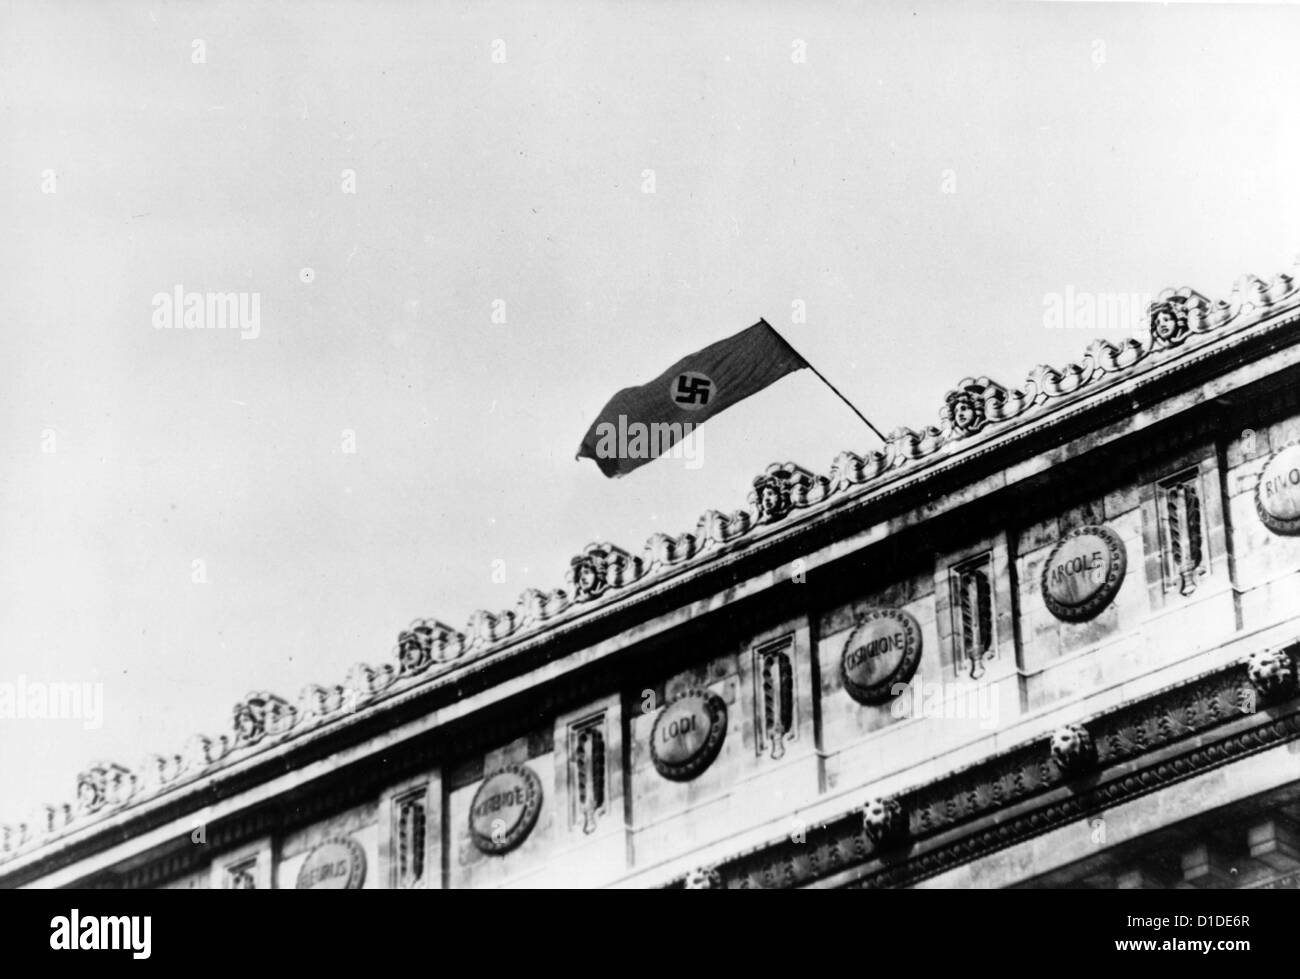 A German swastika flag is hoisted on the Arc de Triomphe in Paris, France, during the invasion of the city by German troops. Fotoarchiv für Zeitgeschichte Stock Photo